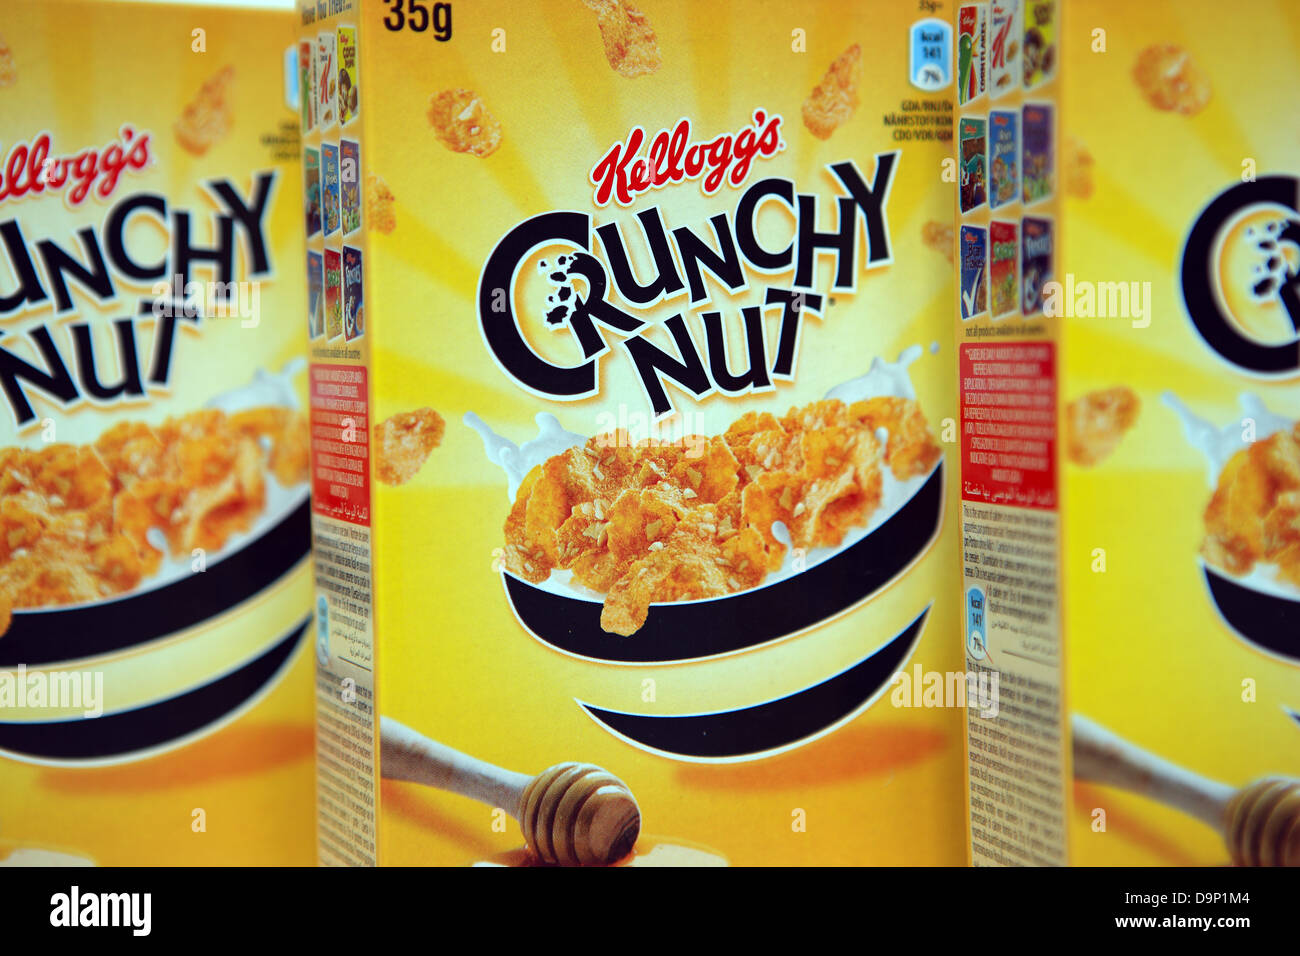 Packets of Kellogg's Crunchy Nut breakfast cereal Stock Photo